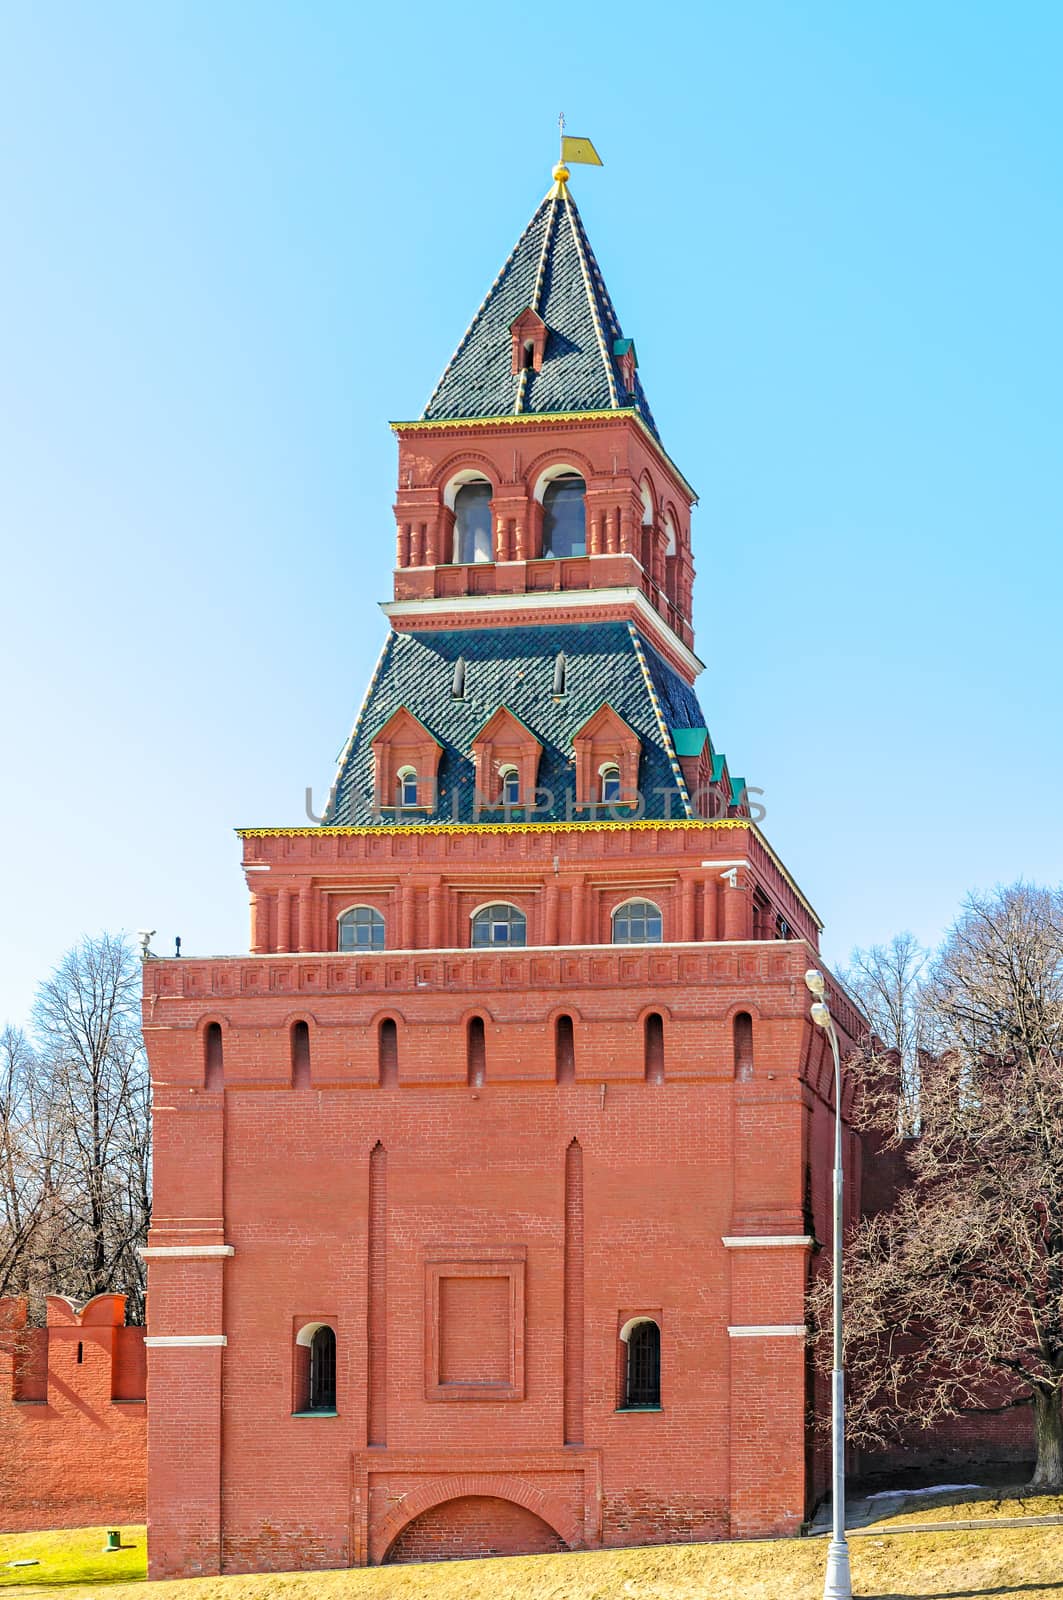 A tower of the Kremlin fortress in Moscow